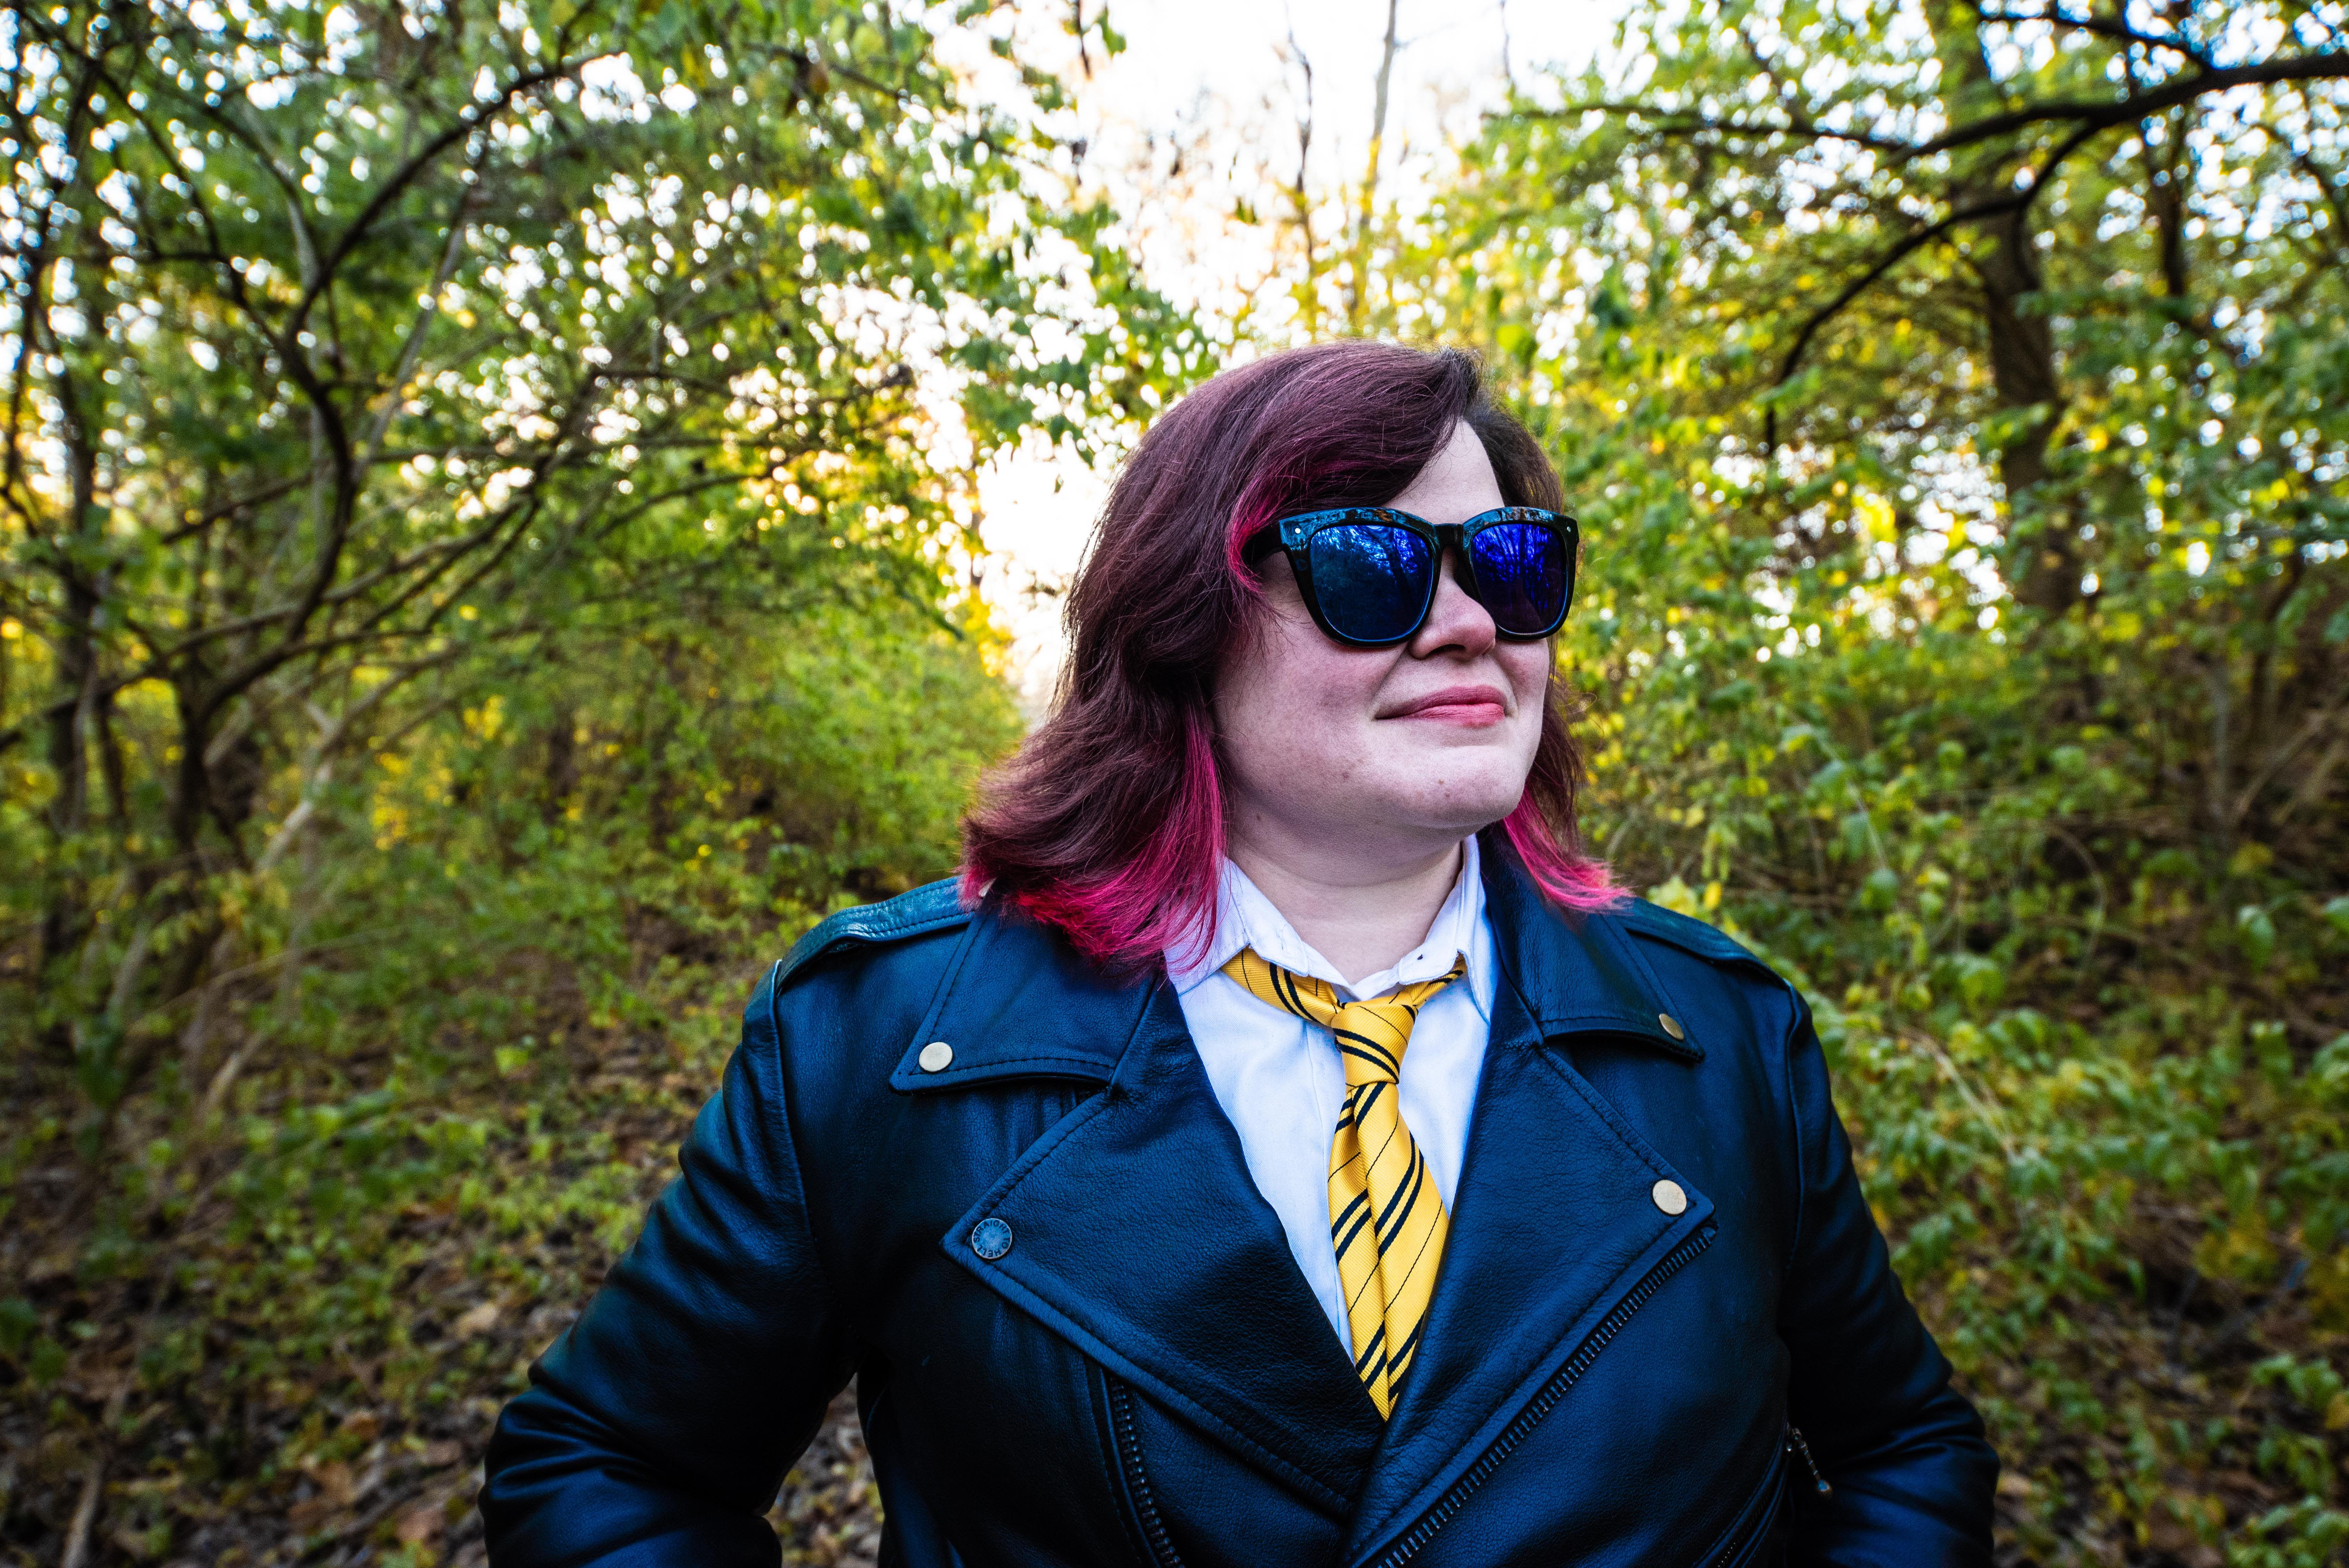 Tonks stands proudly wearing a pair of black sunglasses with lush forest behind her